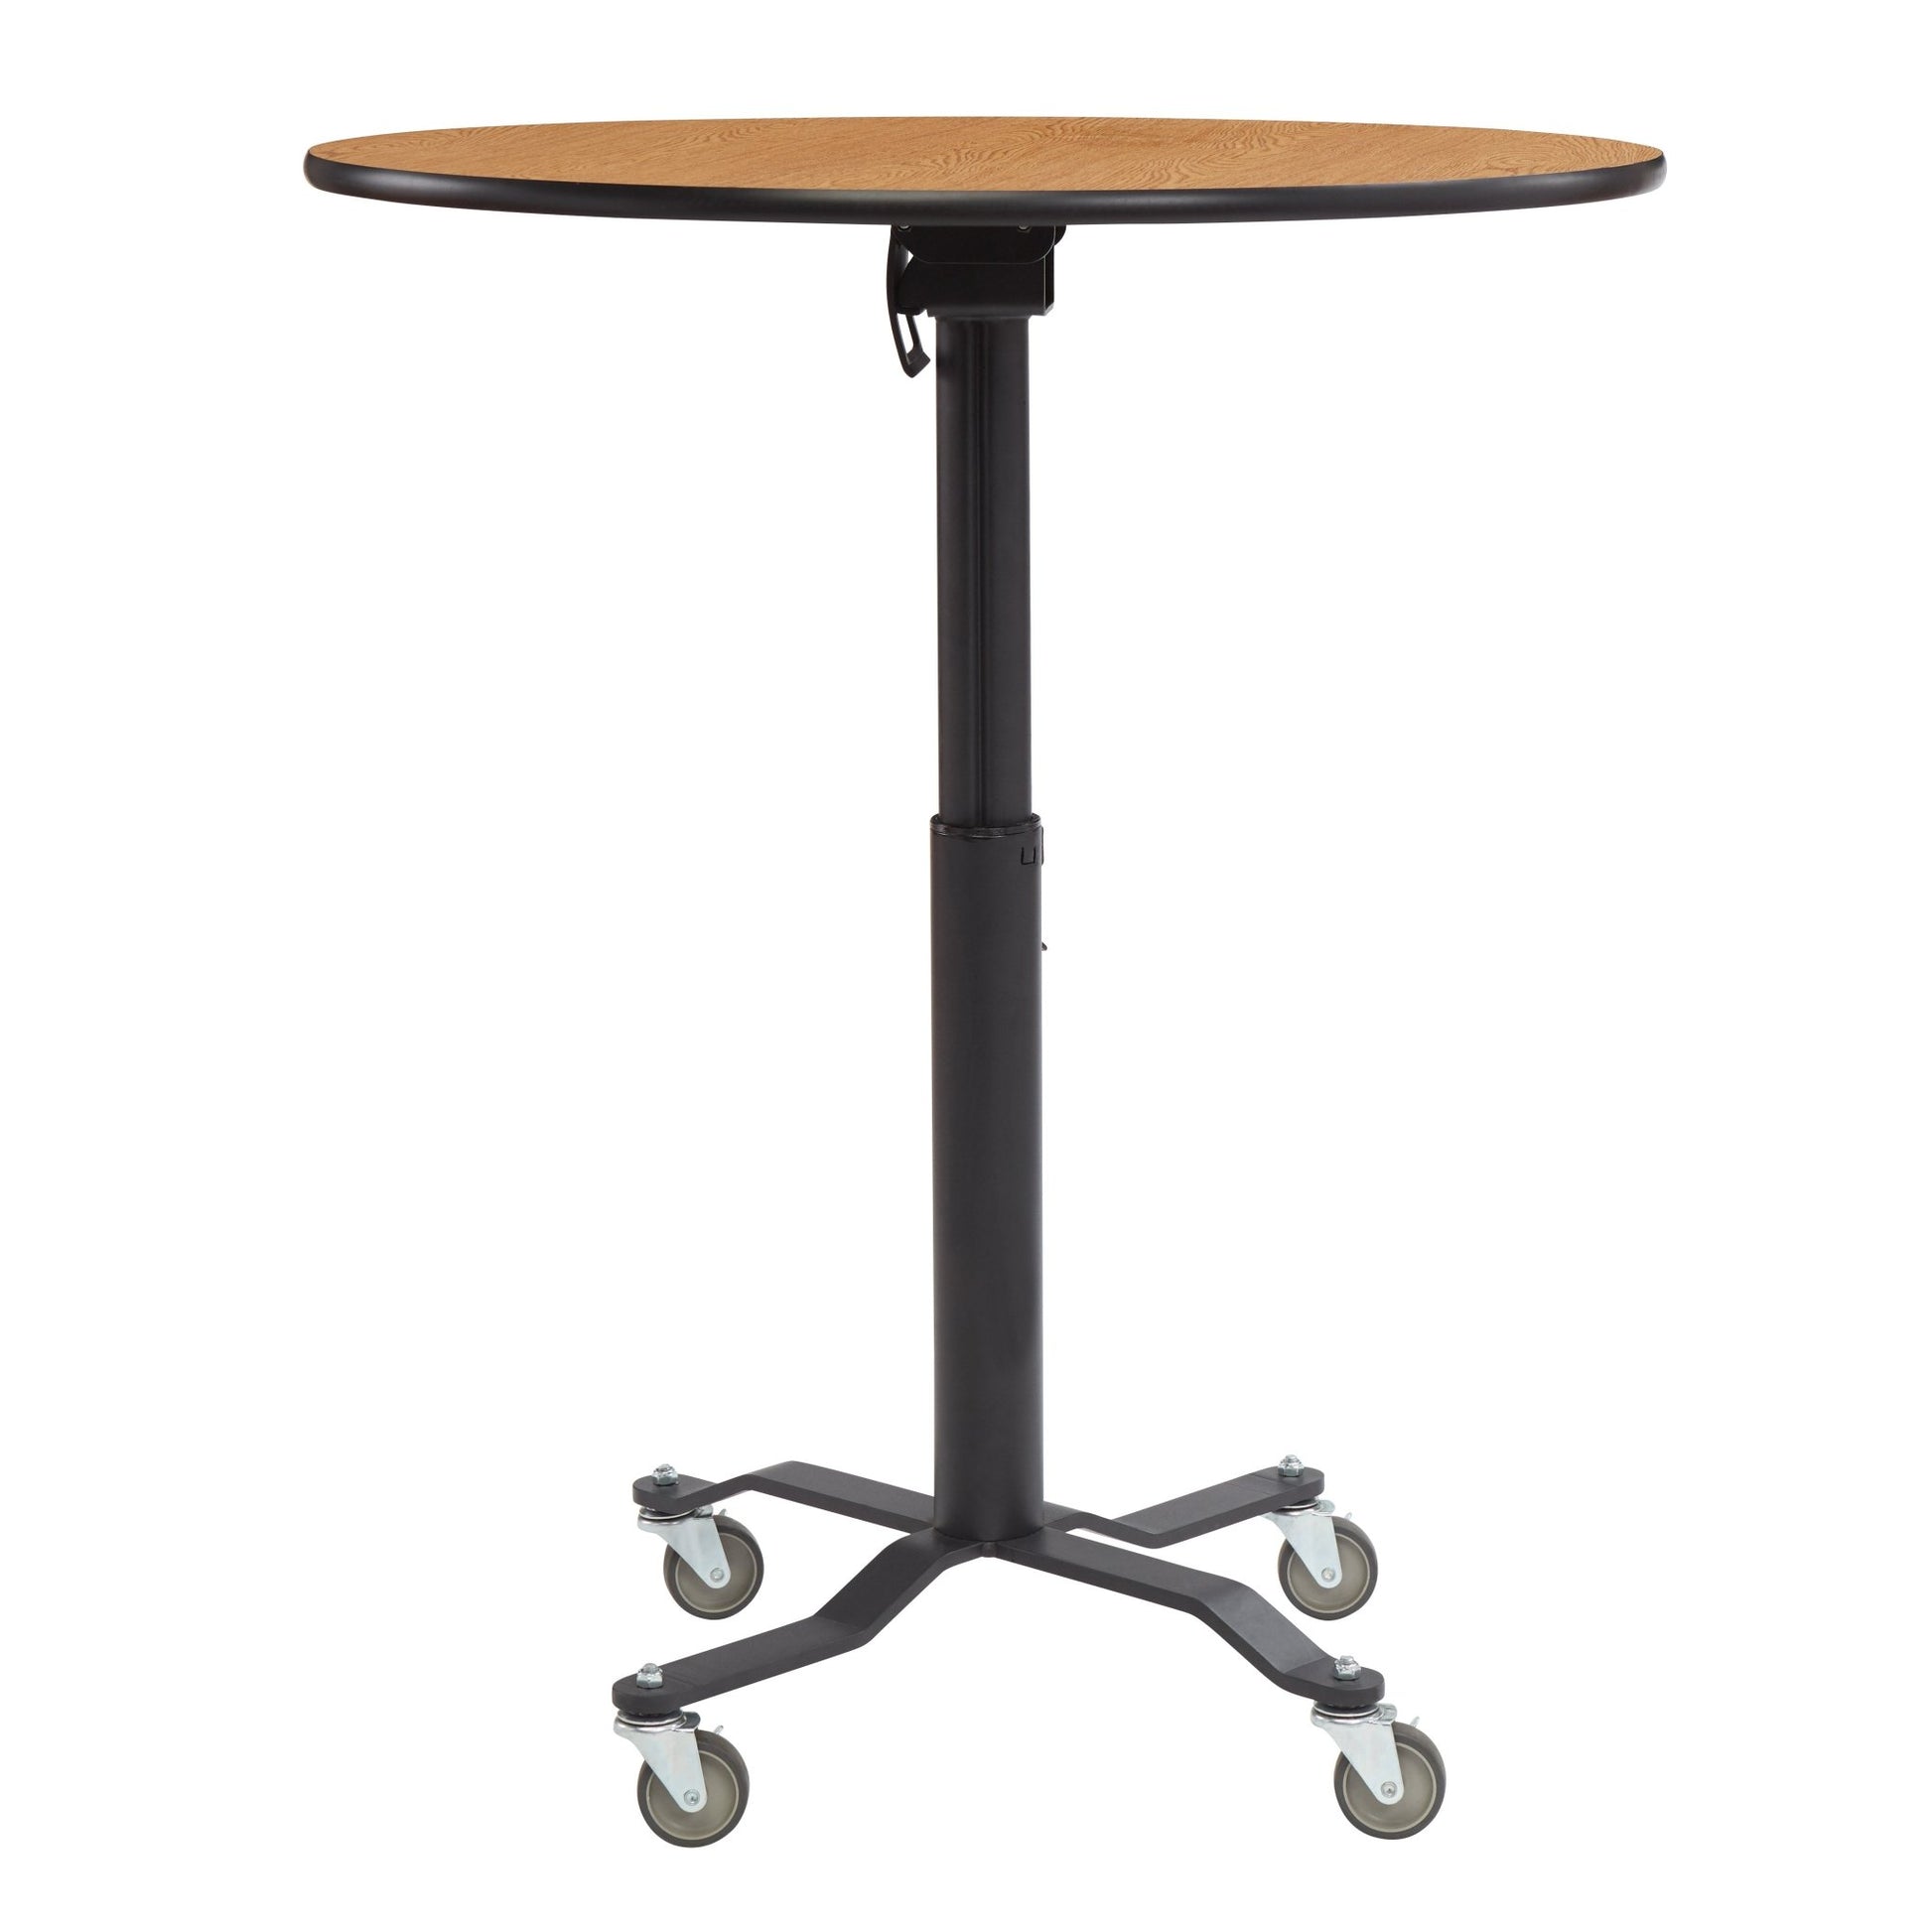 NPS Cafe Time II Table, 30" Round, High Pressure Laminate Top, MDF Core, ProtectEdge (NationalPublic Seating NPS-PCT130MDPE) - SchoolOutlet